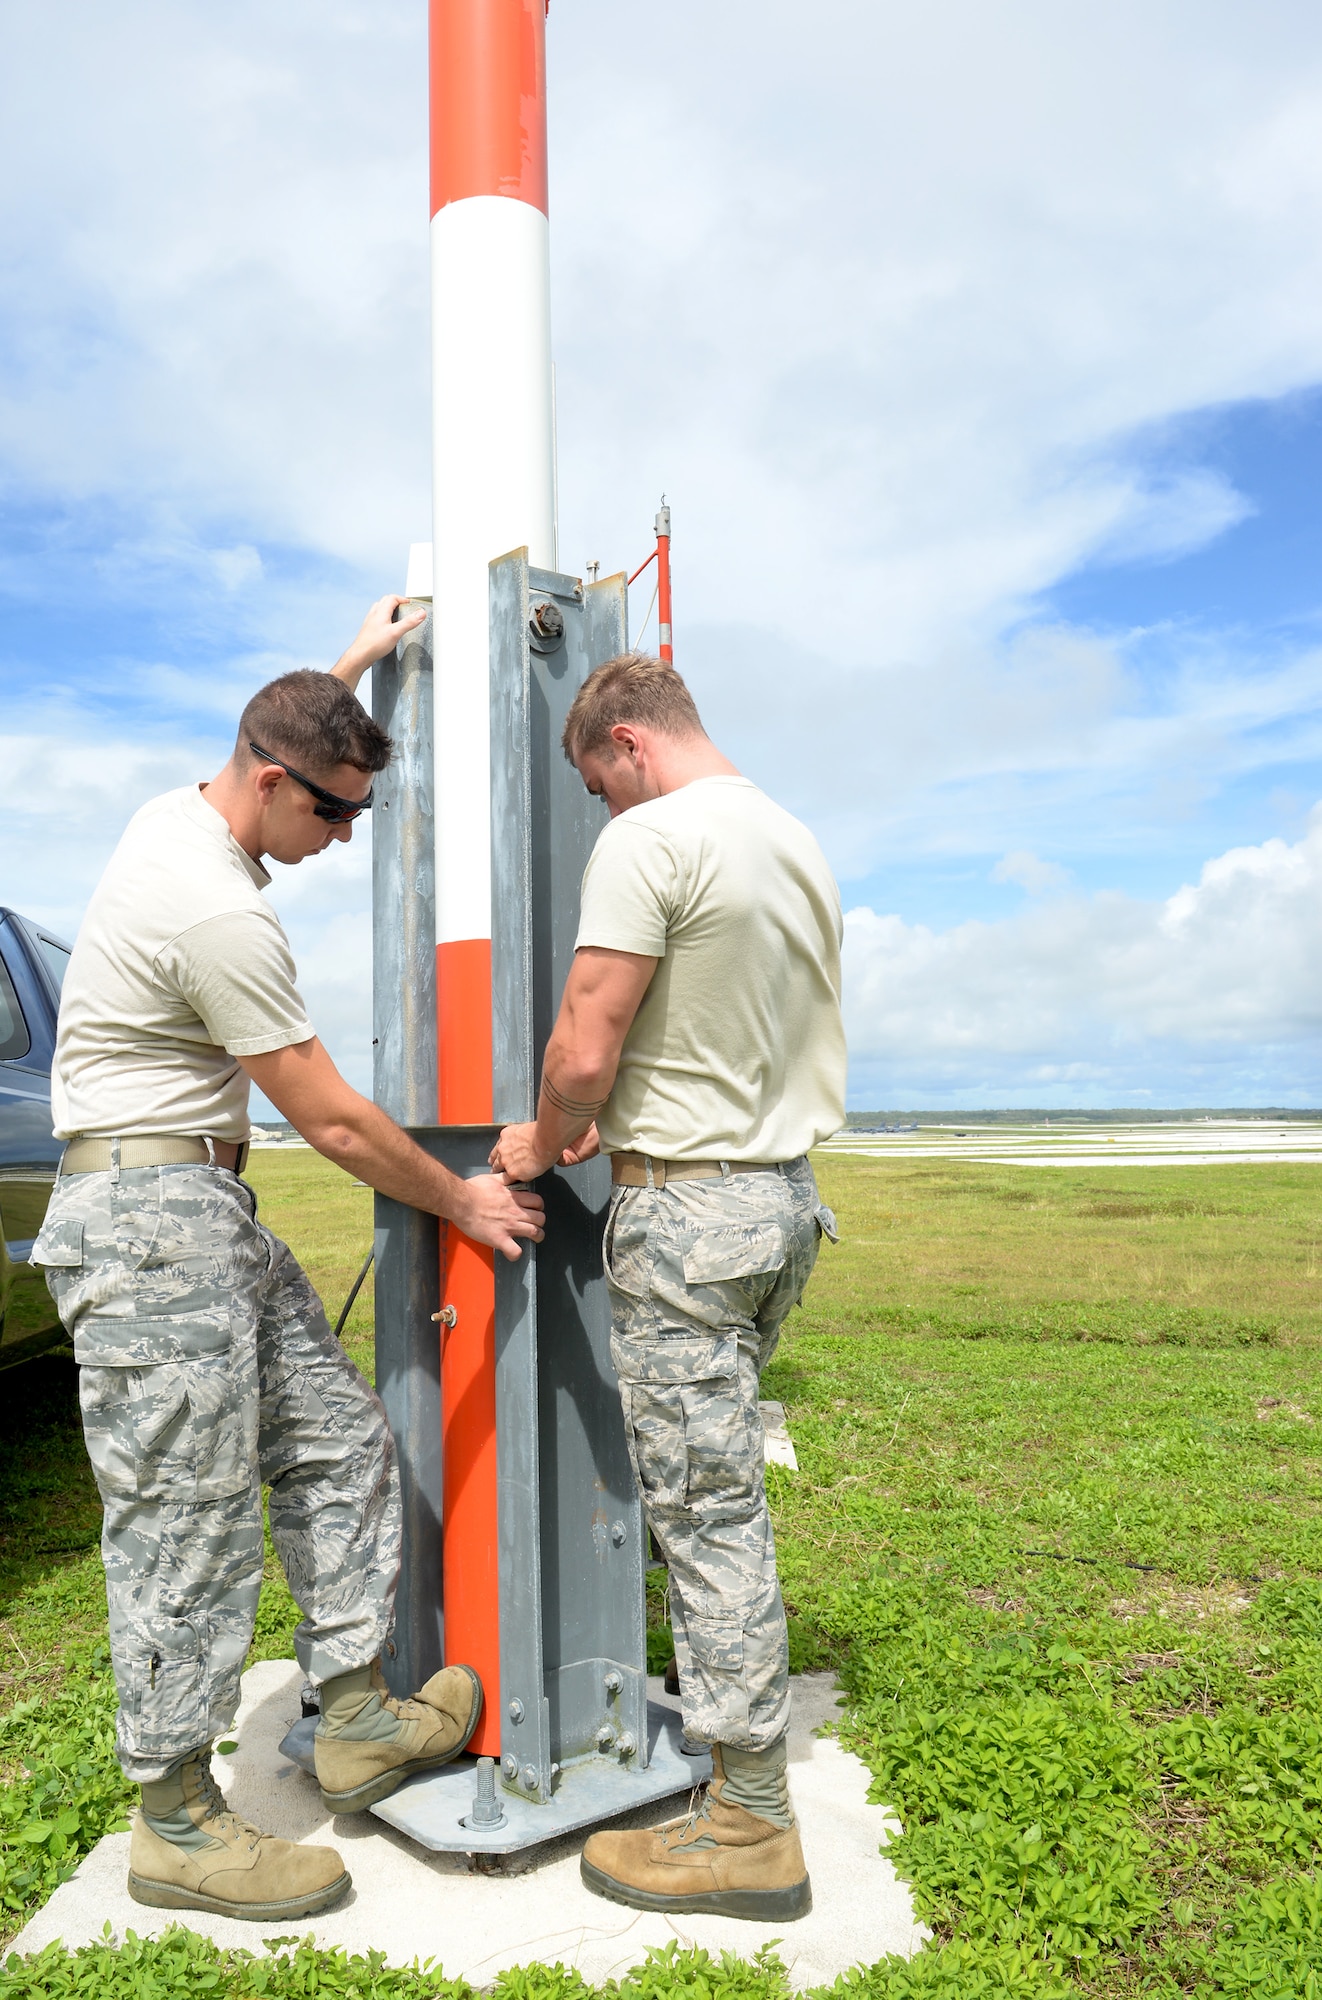 Airfield systems Airmen from the 36th Operations Support Squadron return the wind bird to standing position after performing checks on the instrument’s performance June 2, 2015, at Andersen Air Force Base, Guam. The instrument is a sensor that determines the direction of the wind and is one of many sophisticated pieces of equipment maintained by airfield systems technicians to ensure aircrews remain safe throughout their missions. (U.S. Air Force photo by Senior Airman Amanda Morris/Released)